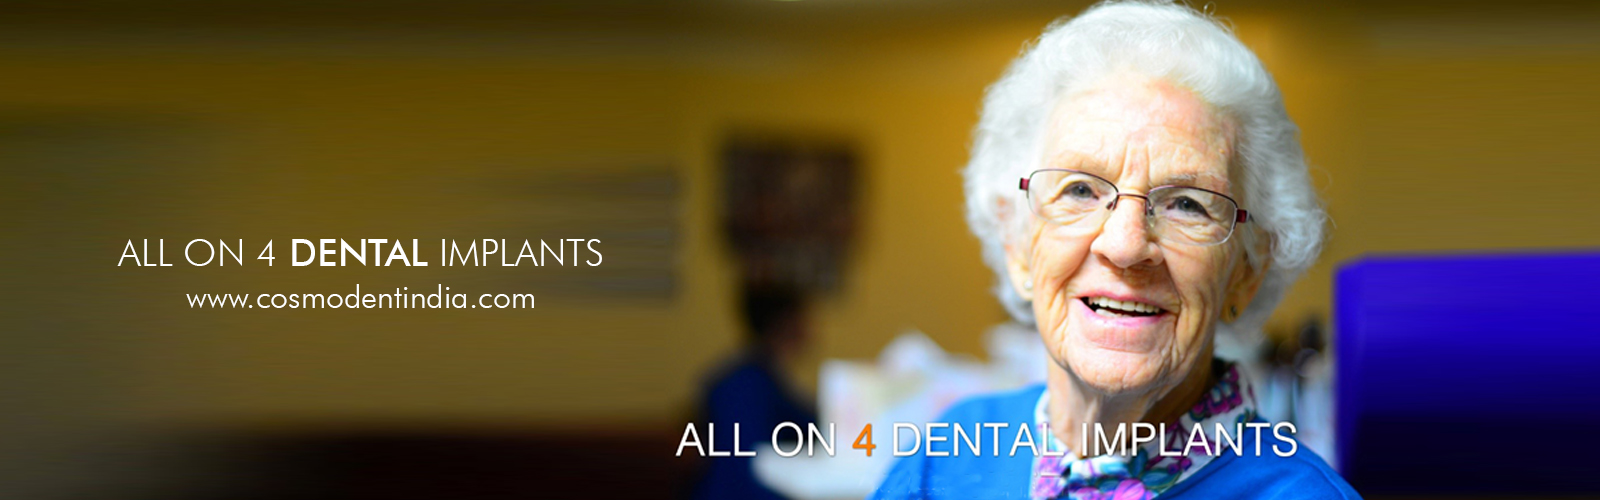 all-on-4-Dental-implants-in-India